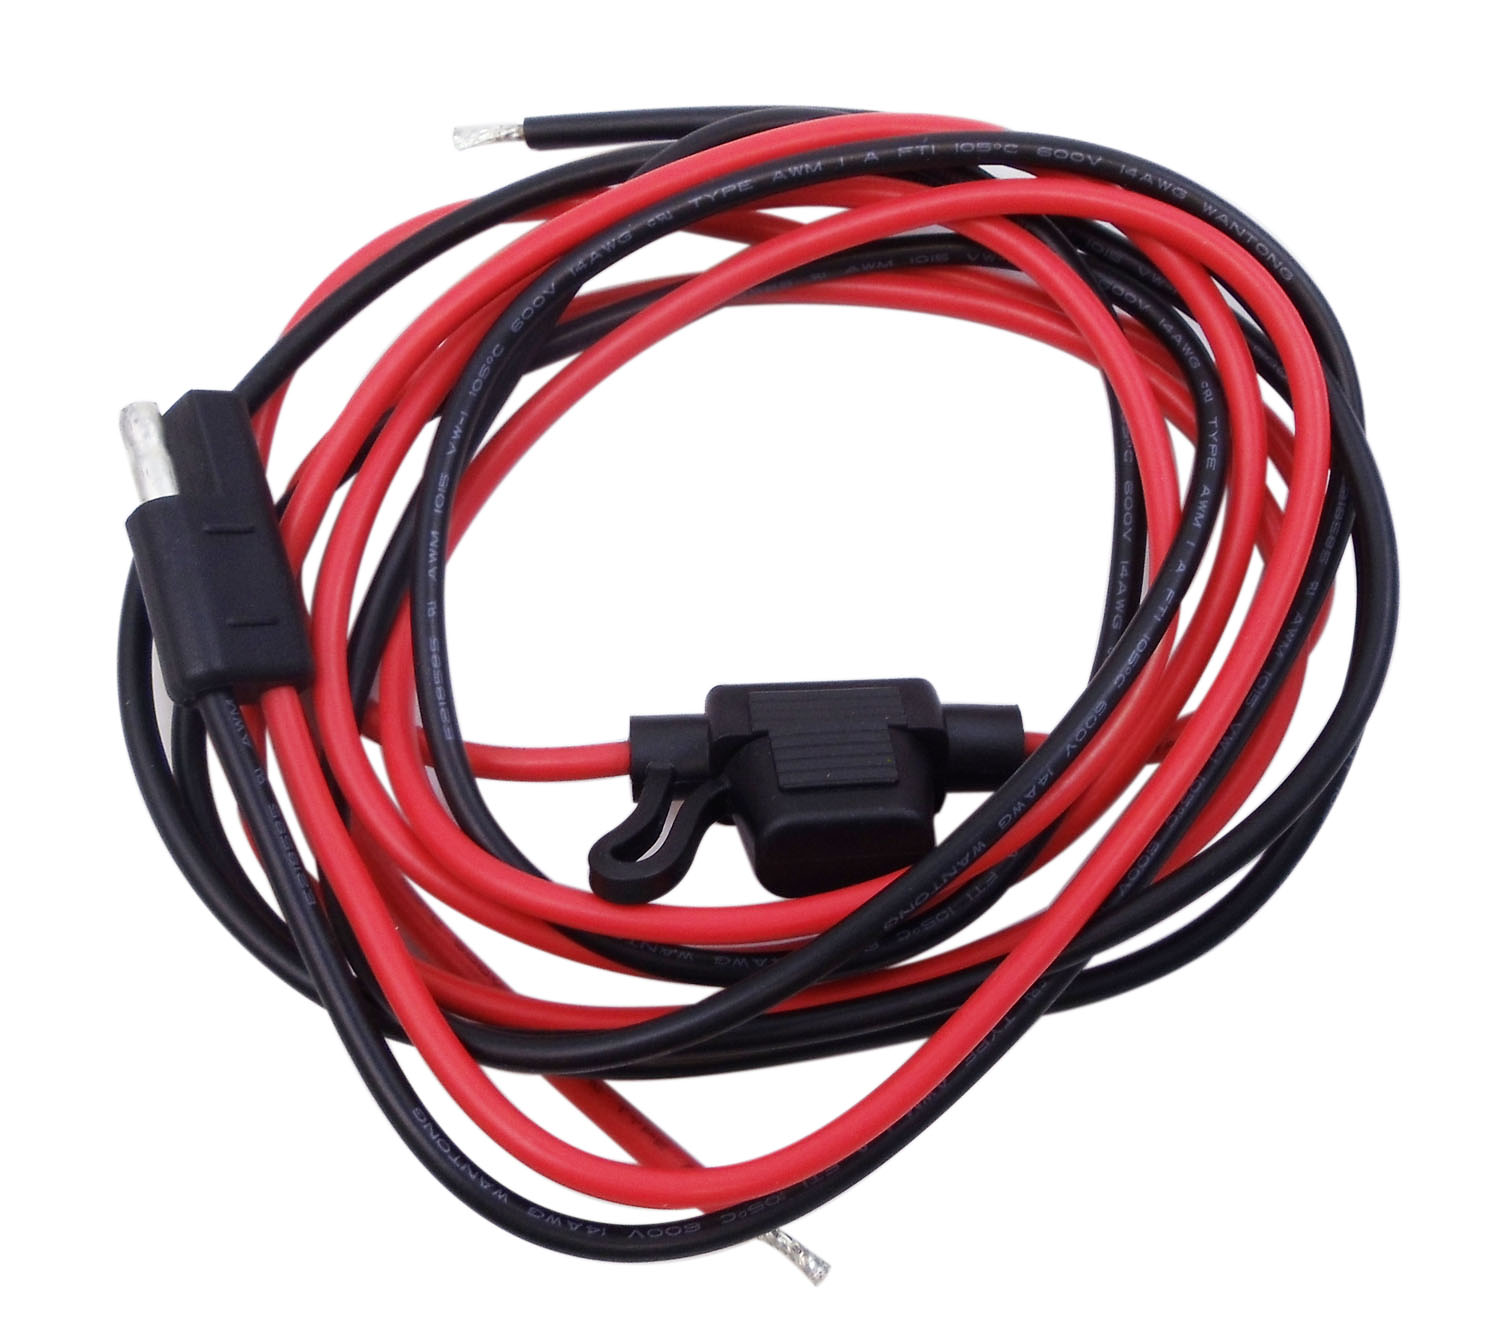 MAGNUM 5 FOOT - 14 GAUGE HEAVY DUTY POWER CORD WITH 15 AMP MINI ATC FUSE